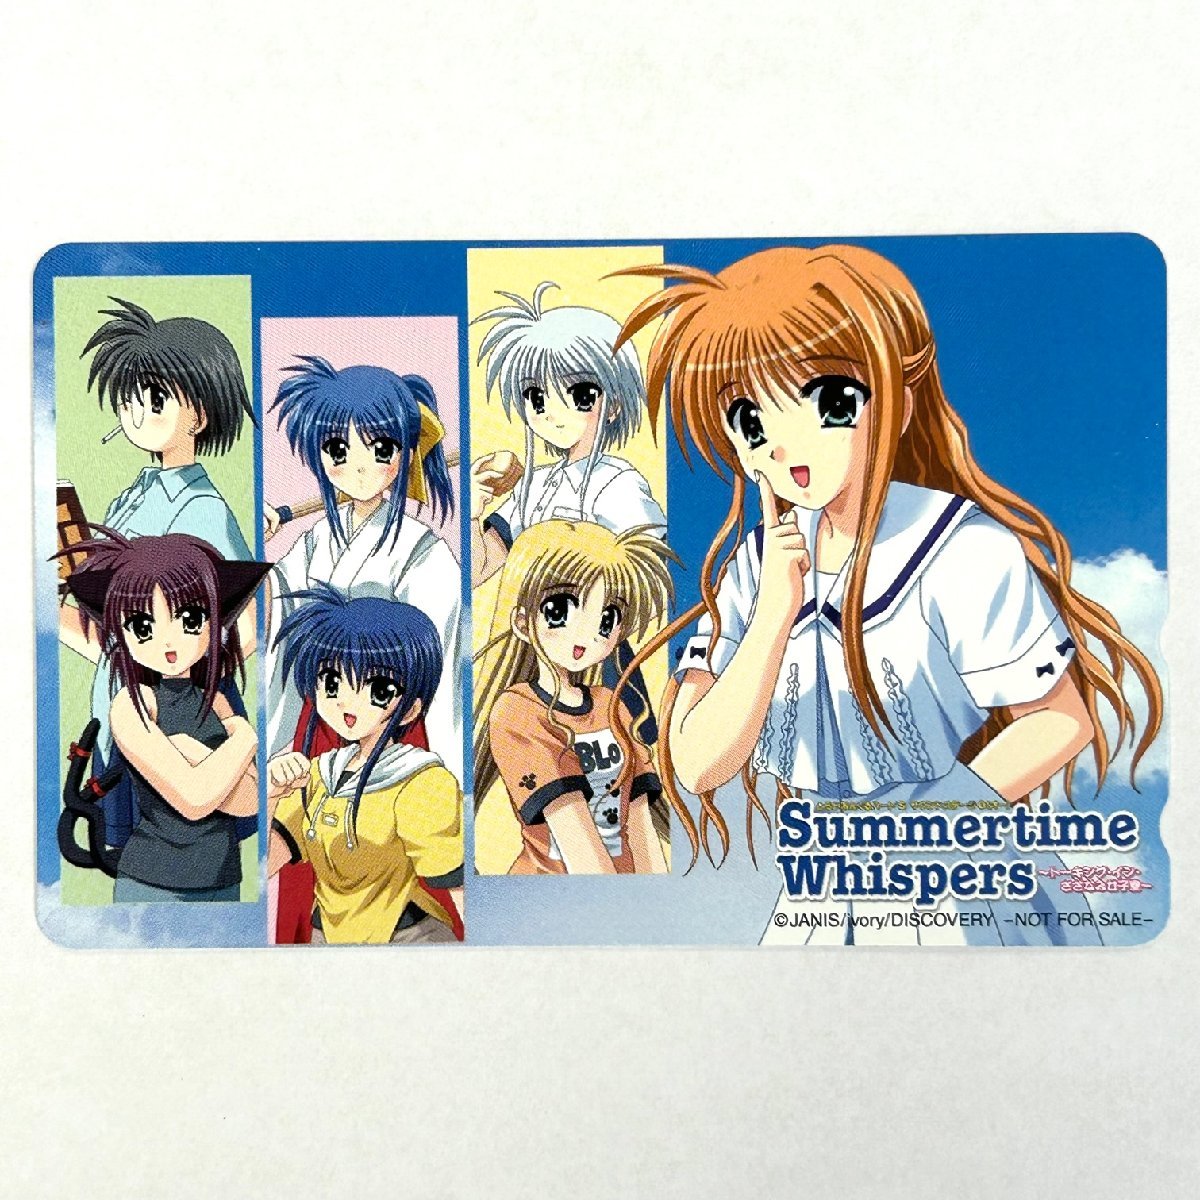 summertime Whidpers【テレカ未使用50度数】とらいあんぐるハート summertime Whispers 額面割れスタート！コレクター放出品 8080の画像1